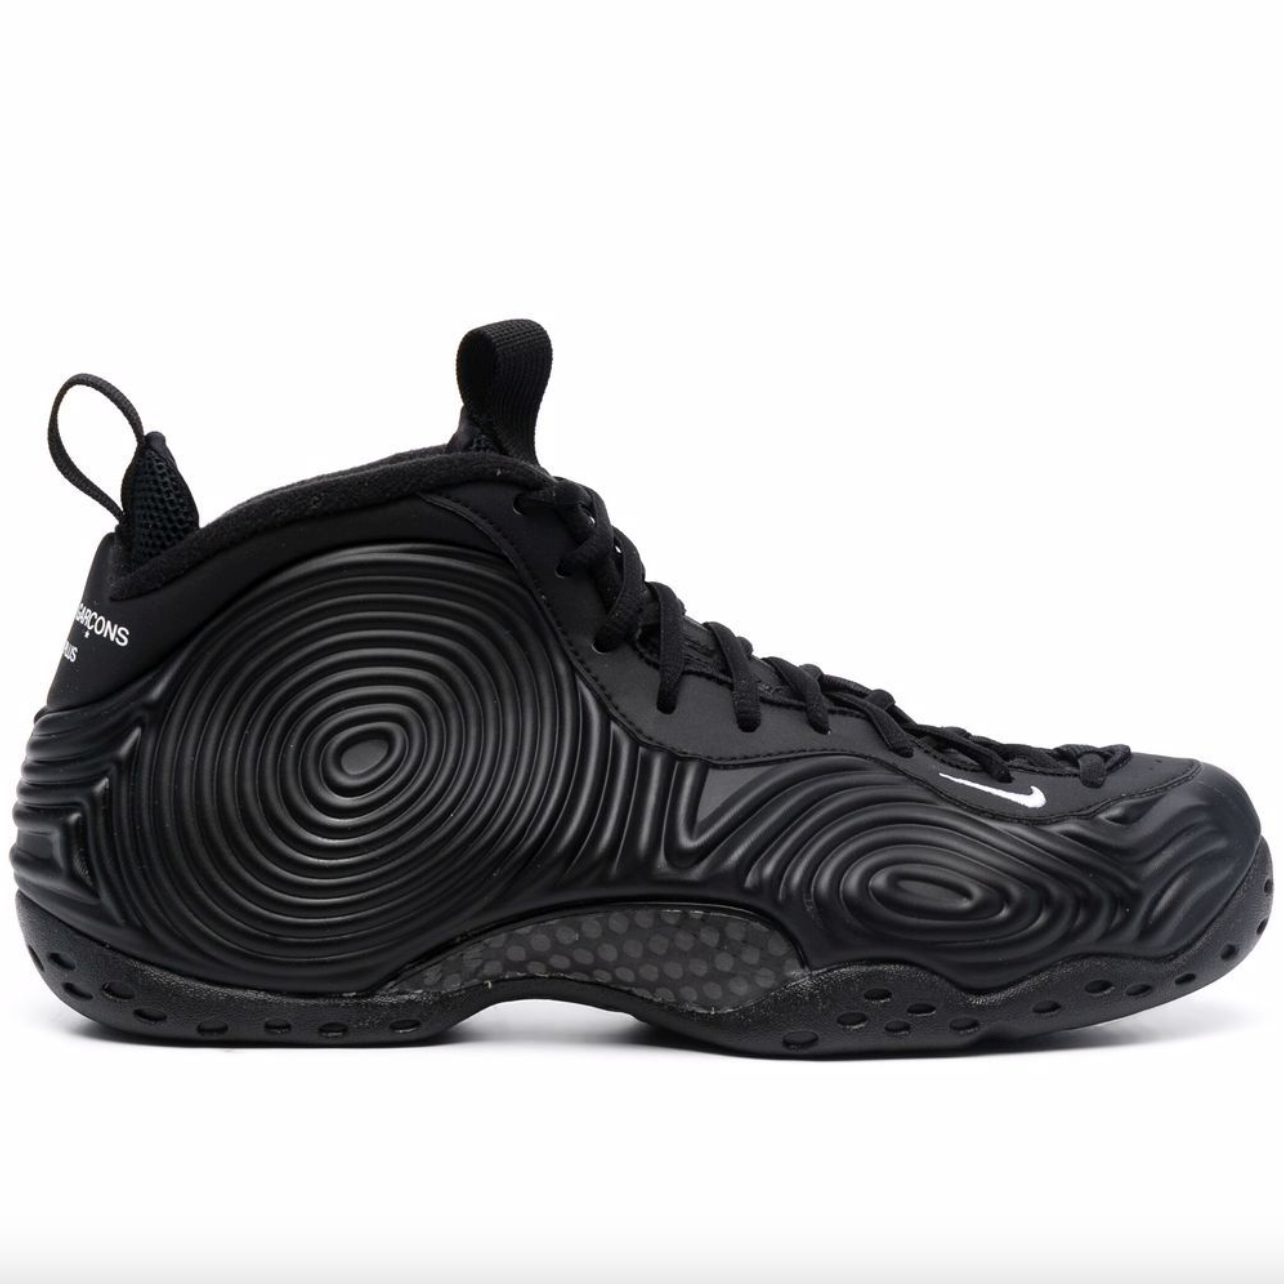 snkrs完売モデル【♕美品✨レア】NIKE AIR FOAMPOSITE PRO